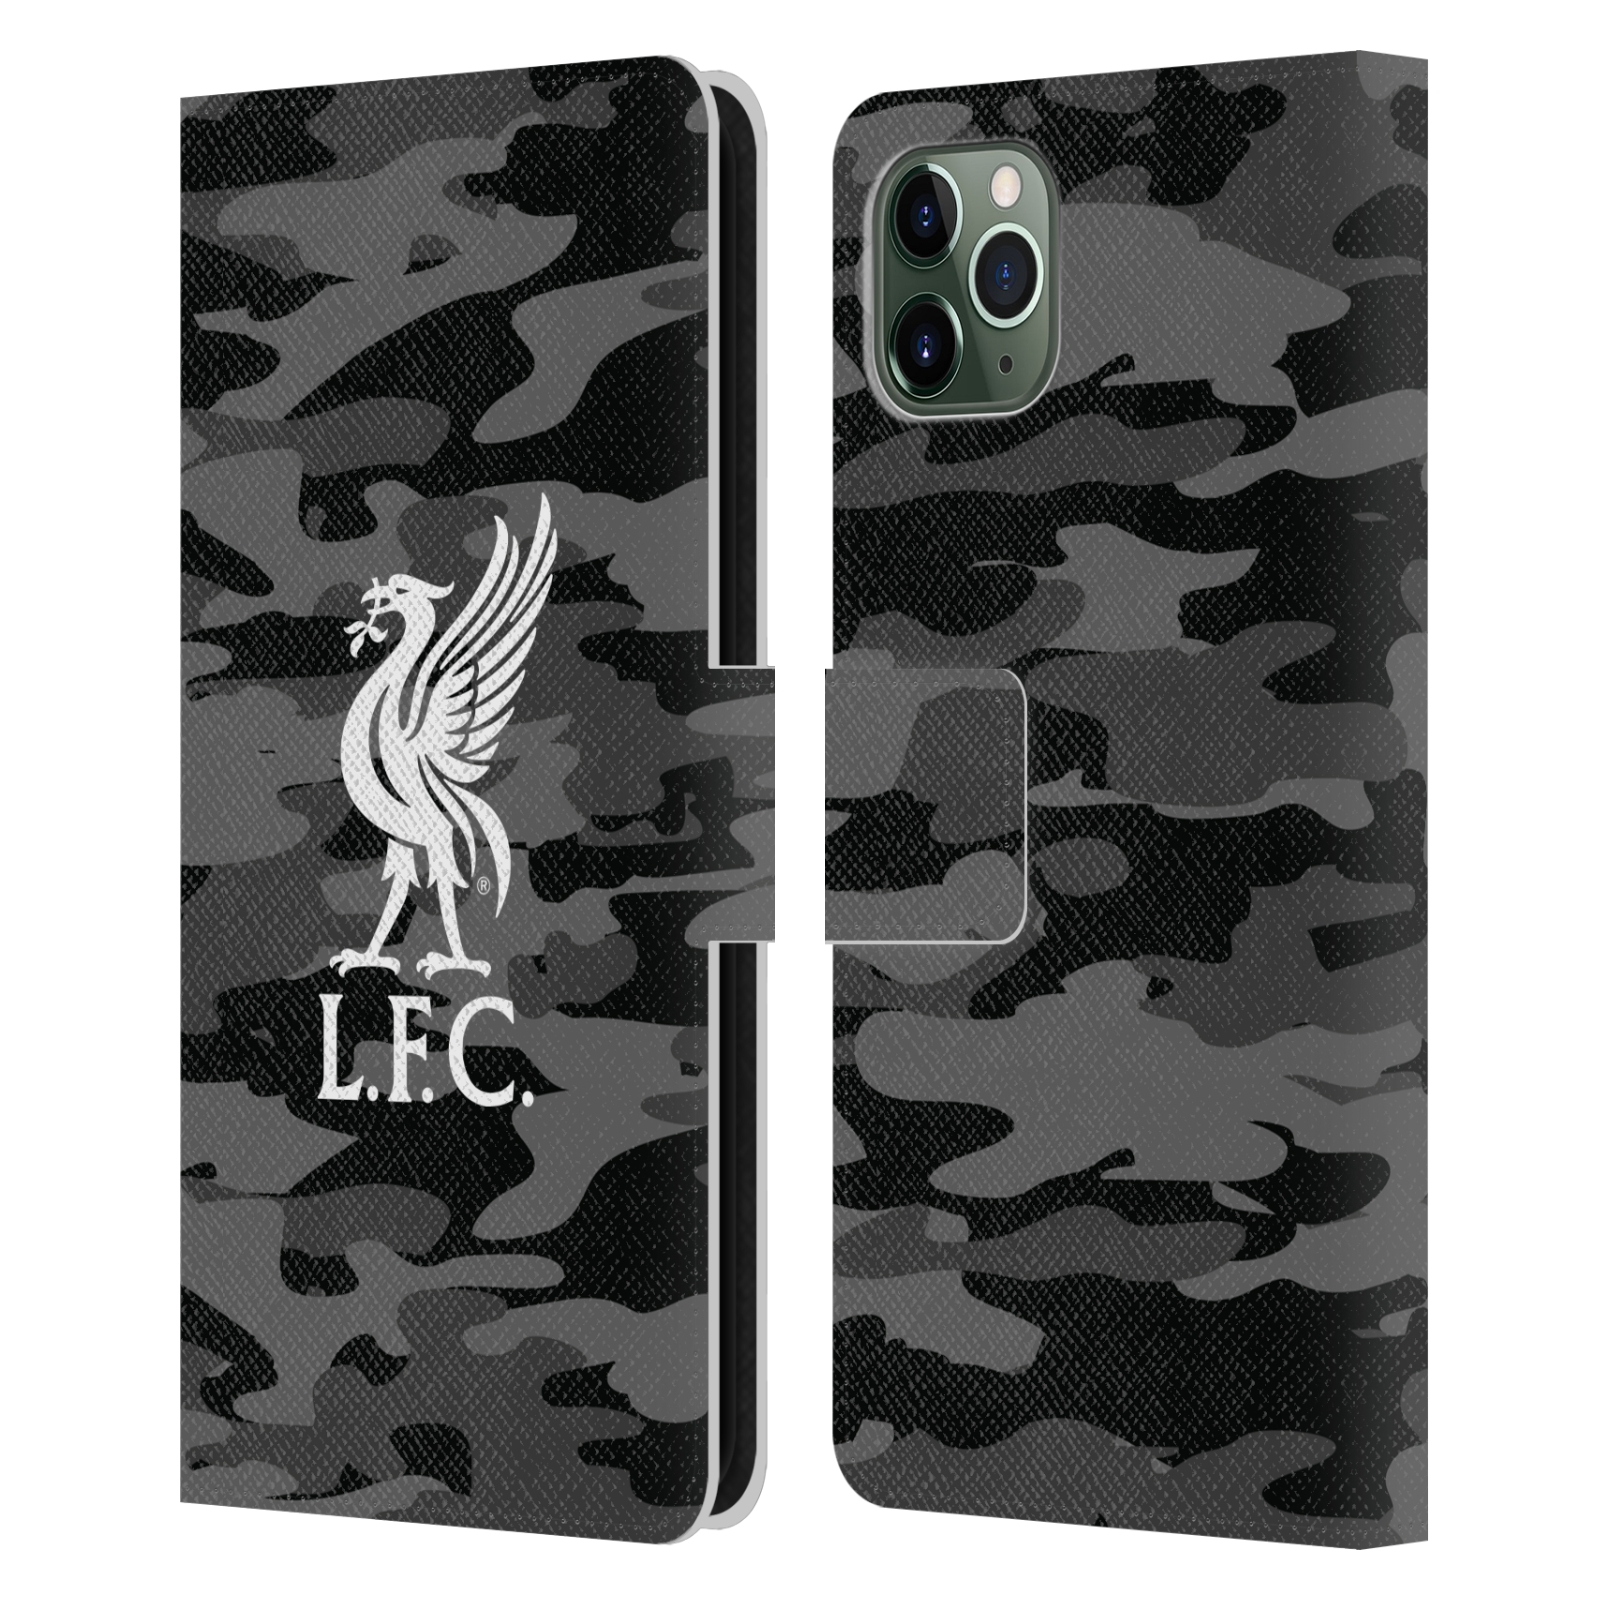 Official Liverpool Football Club Home Red Digital Camouflage PU Leather Book Wallet Case Cover Compatible For Apple iPhone 6 Plus/iPhone 6s Plus